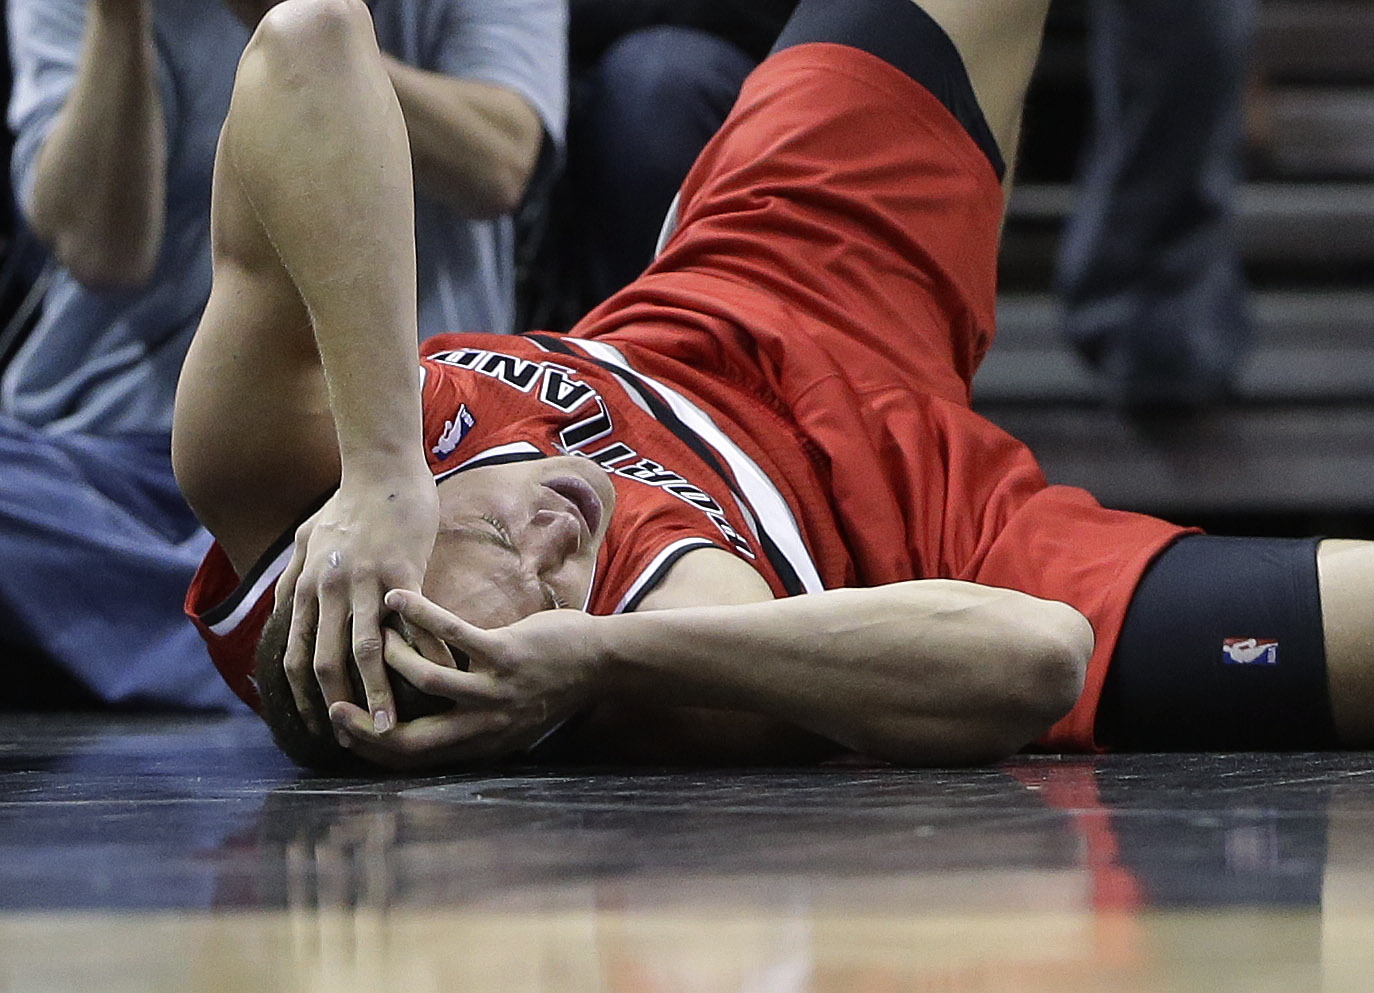 Portland Trail Blazers' Meyers Leonard holds his head after he was injured during the first half of an NBA basketball game against the San Antonio Spurs, Friday, March 8, 2013, in San Antonio.